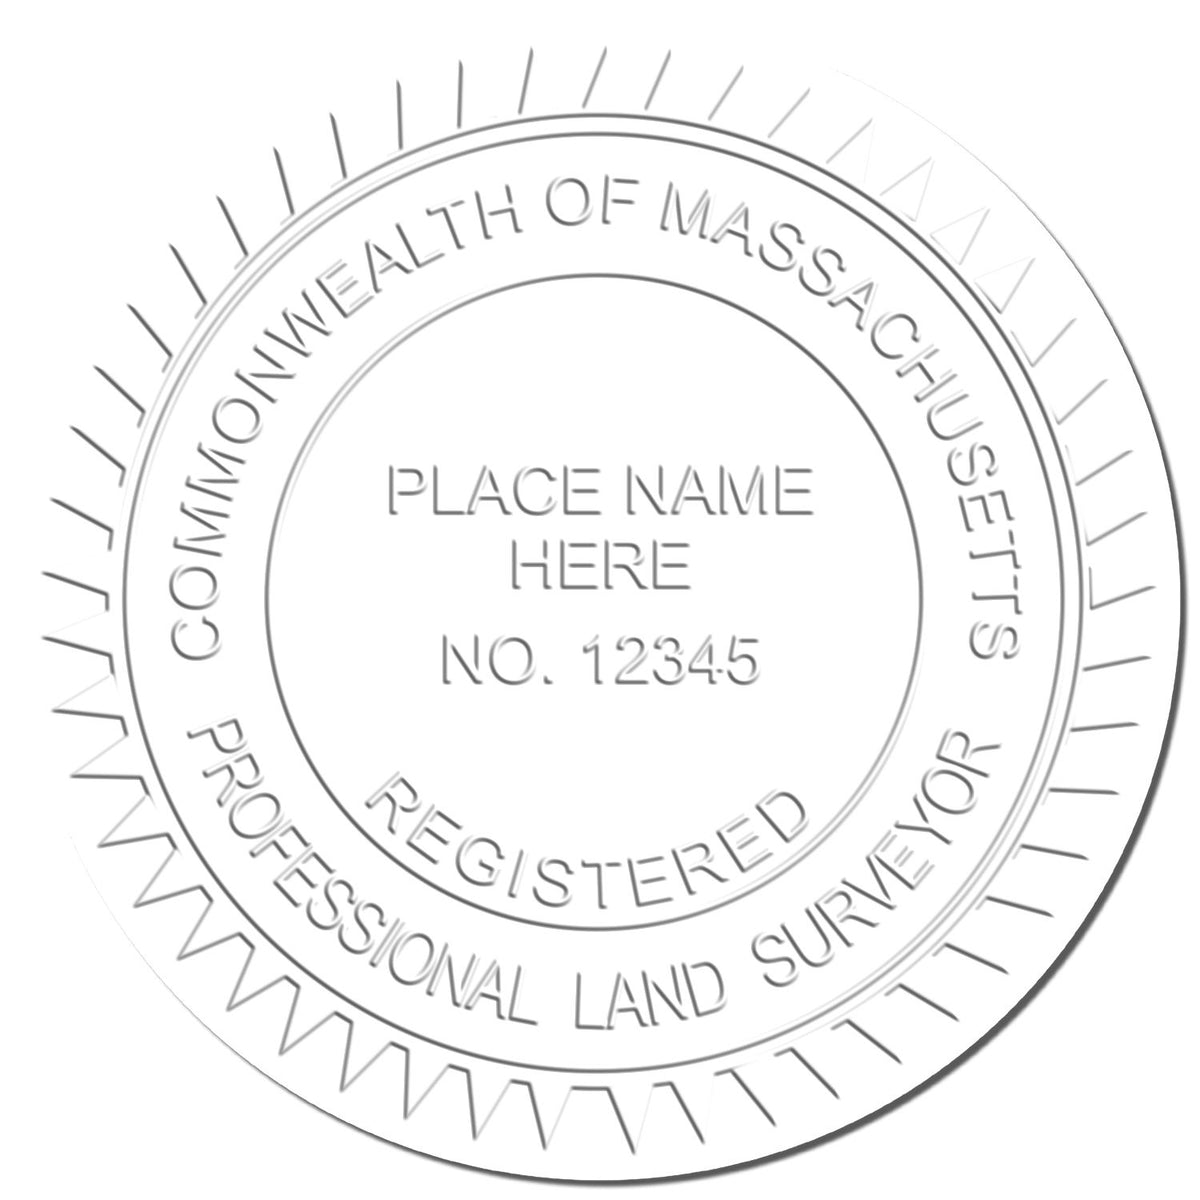 This paper is stamped with a sample imprint of the Handheld Massachusetts Land Surveyor Seal, signifying its quality and reliability.